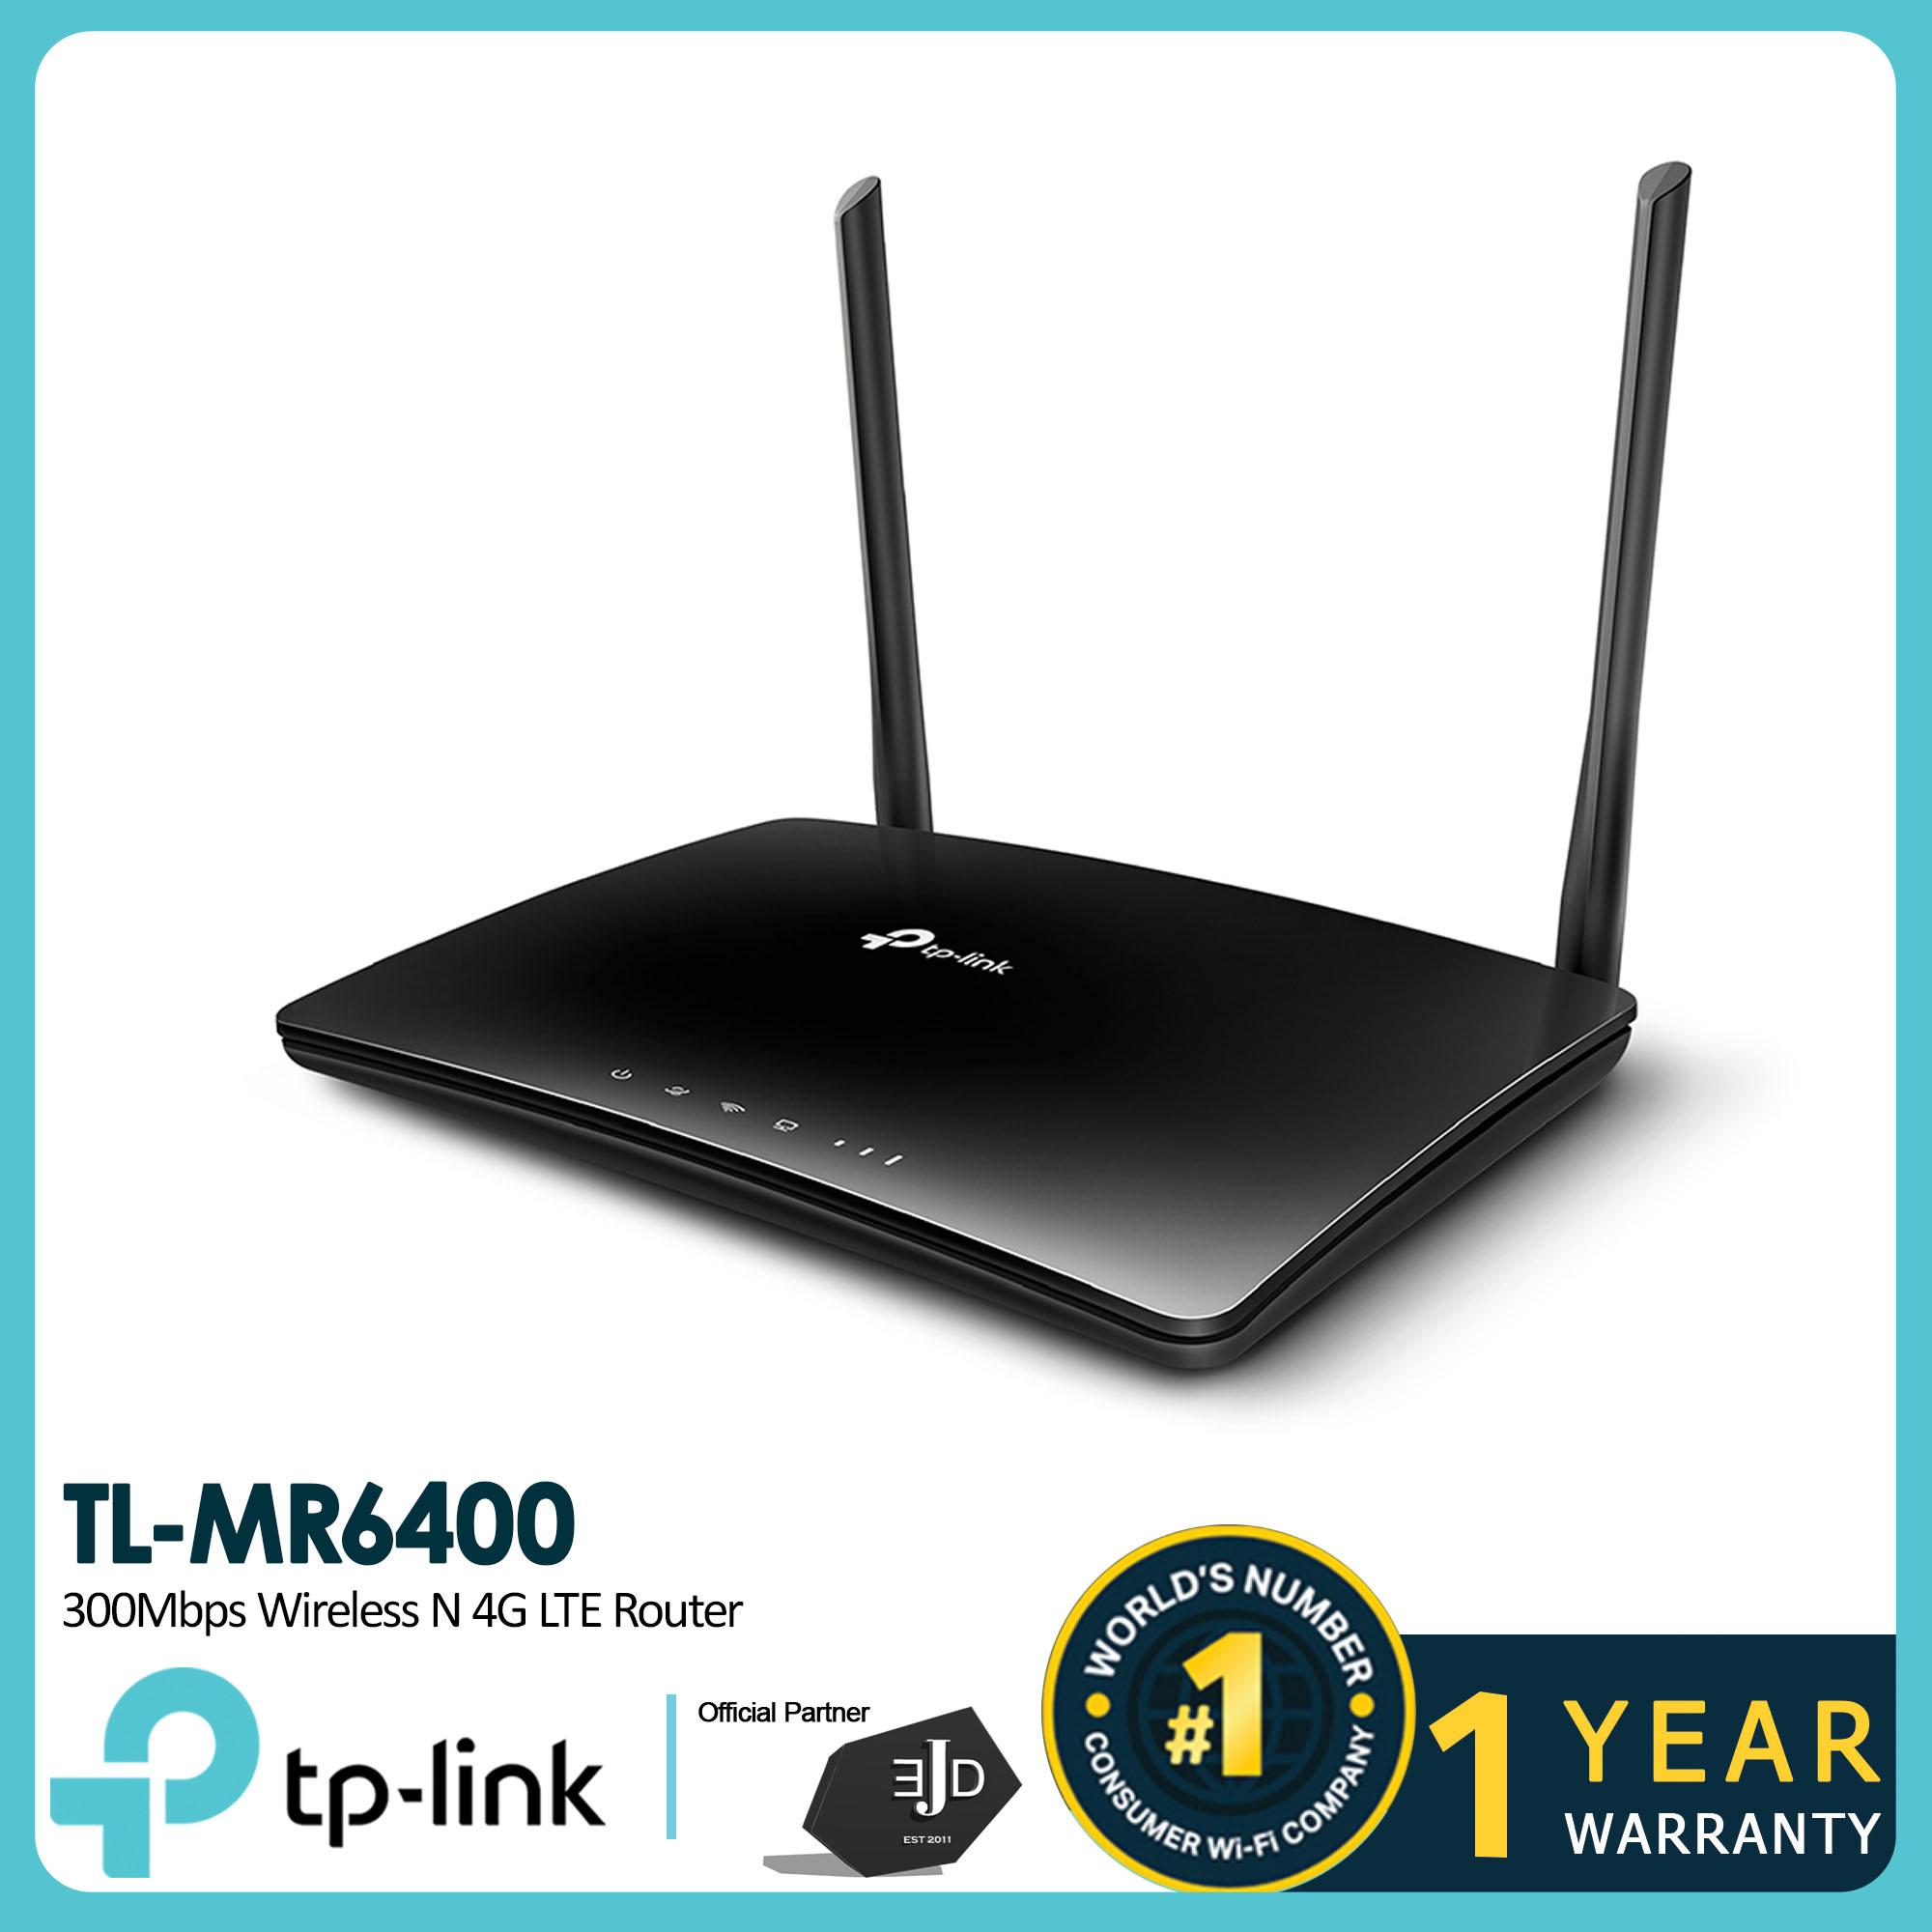 TL-MR6400, 300Mbps Wireless N 4G LTE Router